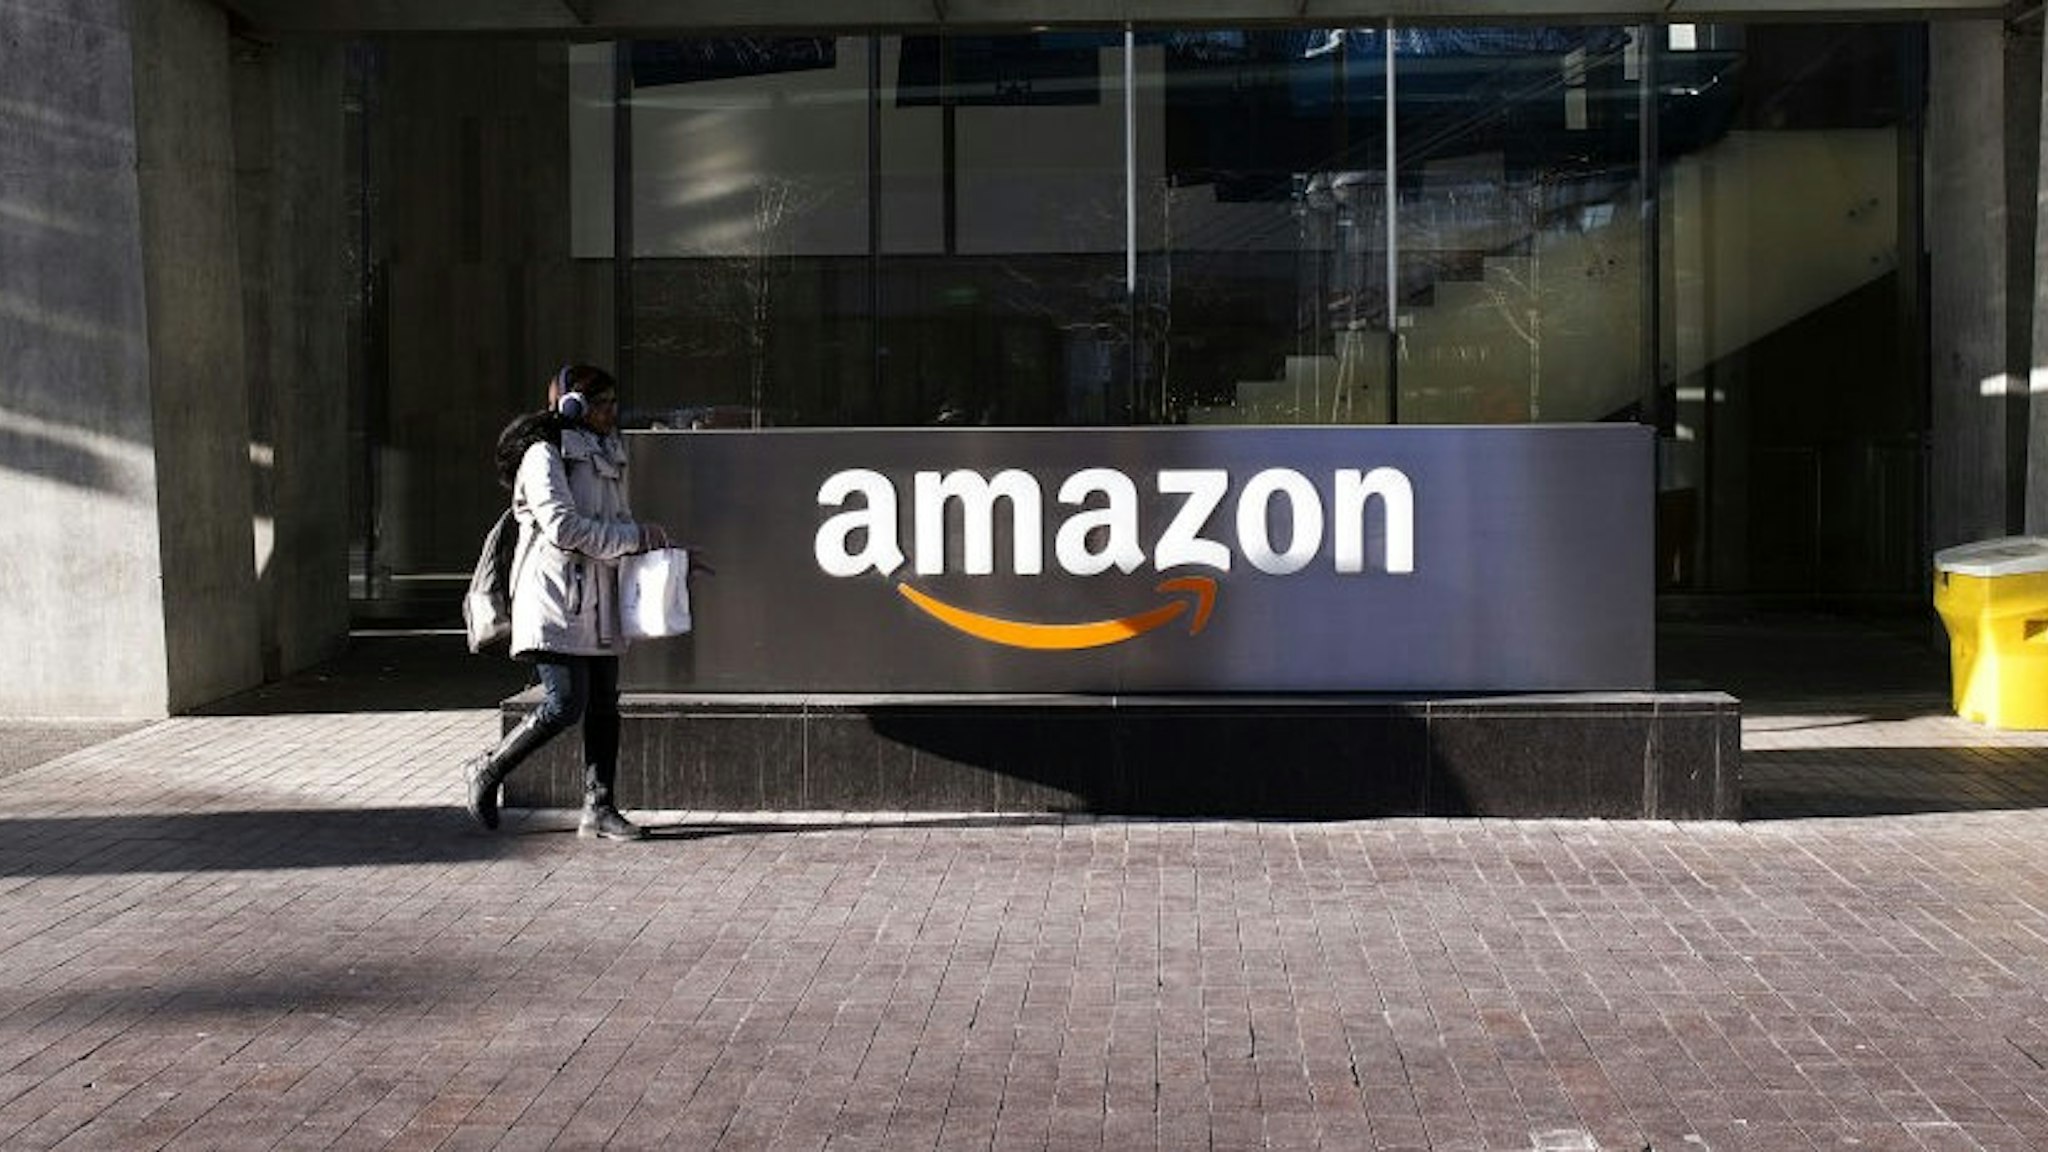 A pedestrian walks past the Amazon.com Inc. headquarters in the financial district of Toronto, Ontario, Canada, on Friday, Feb. 21, 2020. Canadian stocks declined with global markets, as authorities struggled to keep the coronavirus from spreading more widely outside China. However, investors flocking to safe havens such as gold offset the sell-off in Canada's stock market. Photographer: